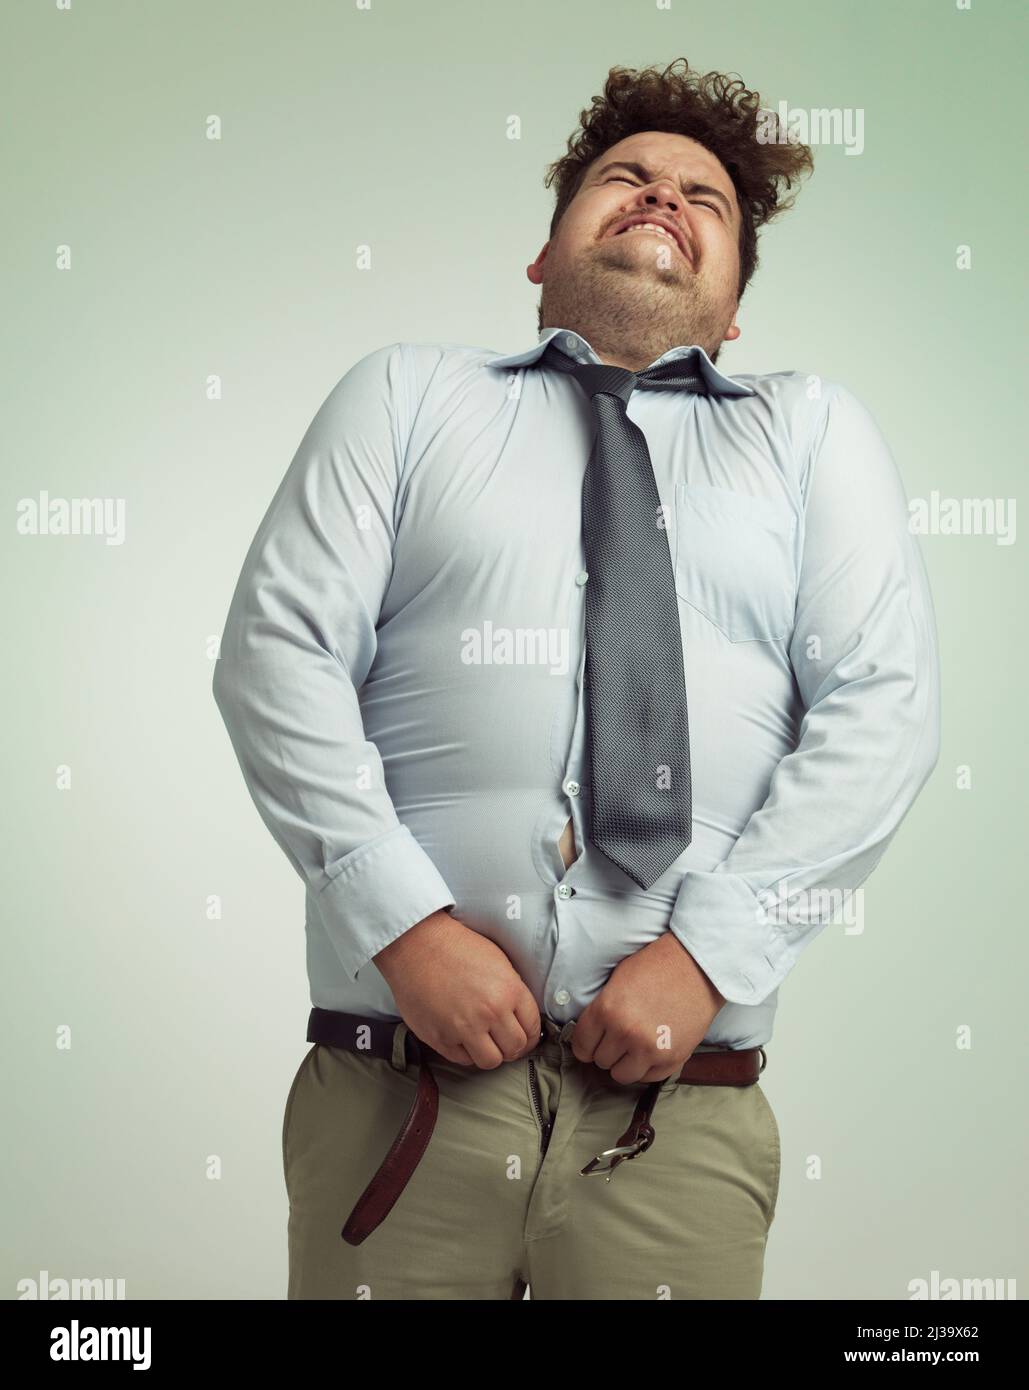 Willing his pants closed. Humorous studio shot of an overweight ...